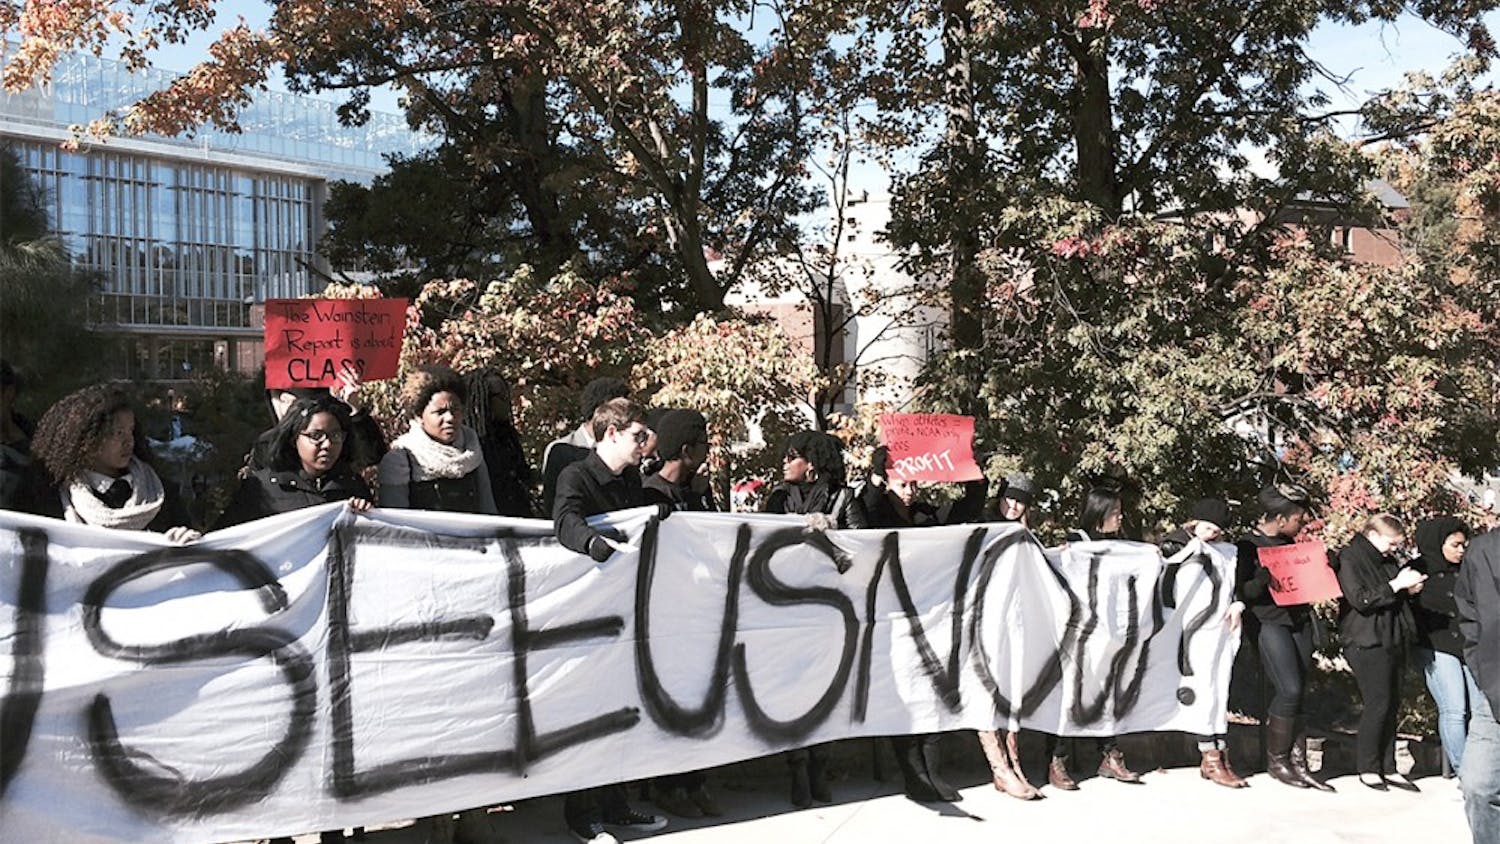 The Real Silent Sam Coalition ended its CanYouSeeUsNow march outside of Kenan Stadium during UNC’s Homecoming game.